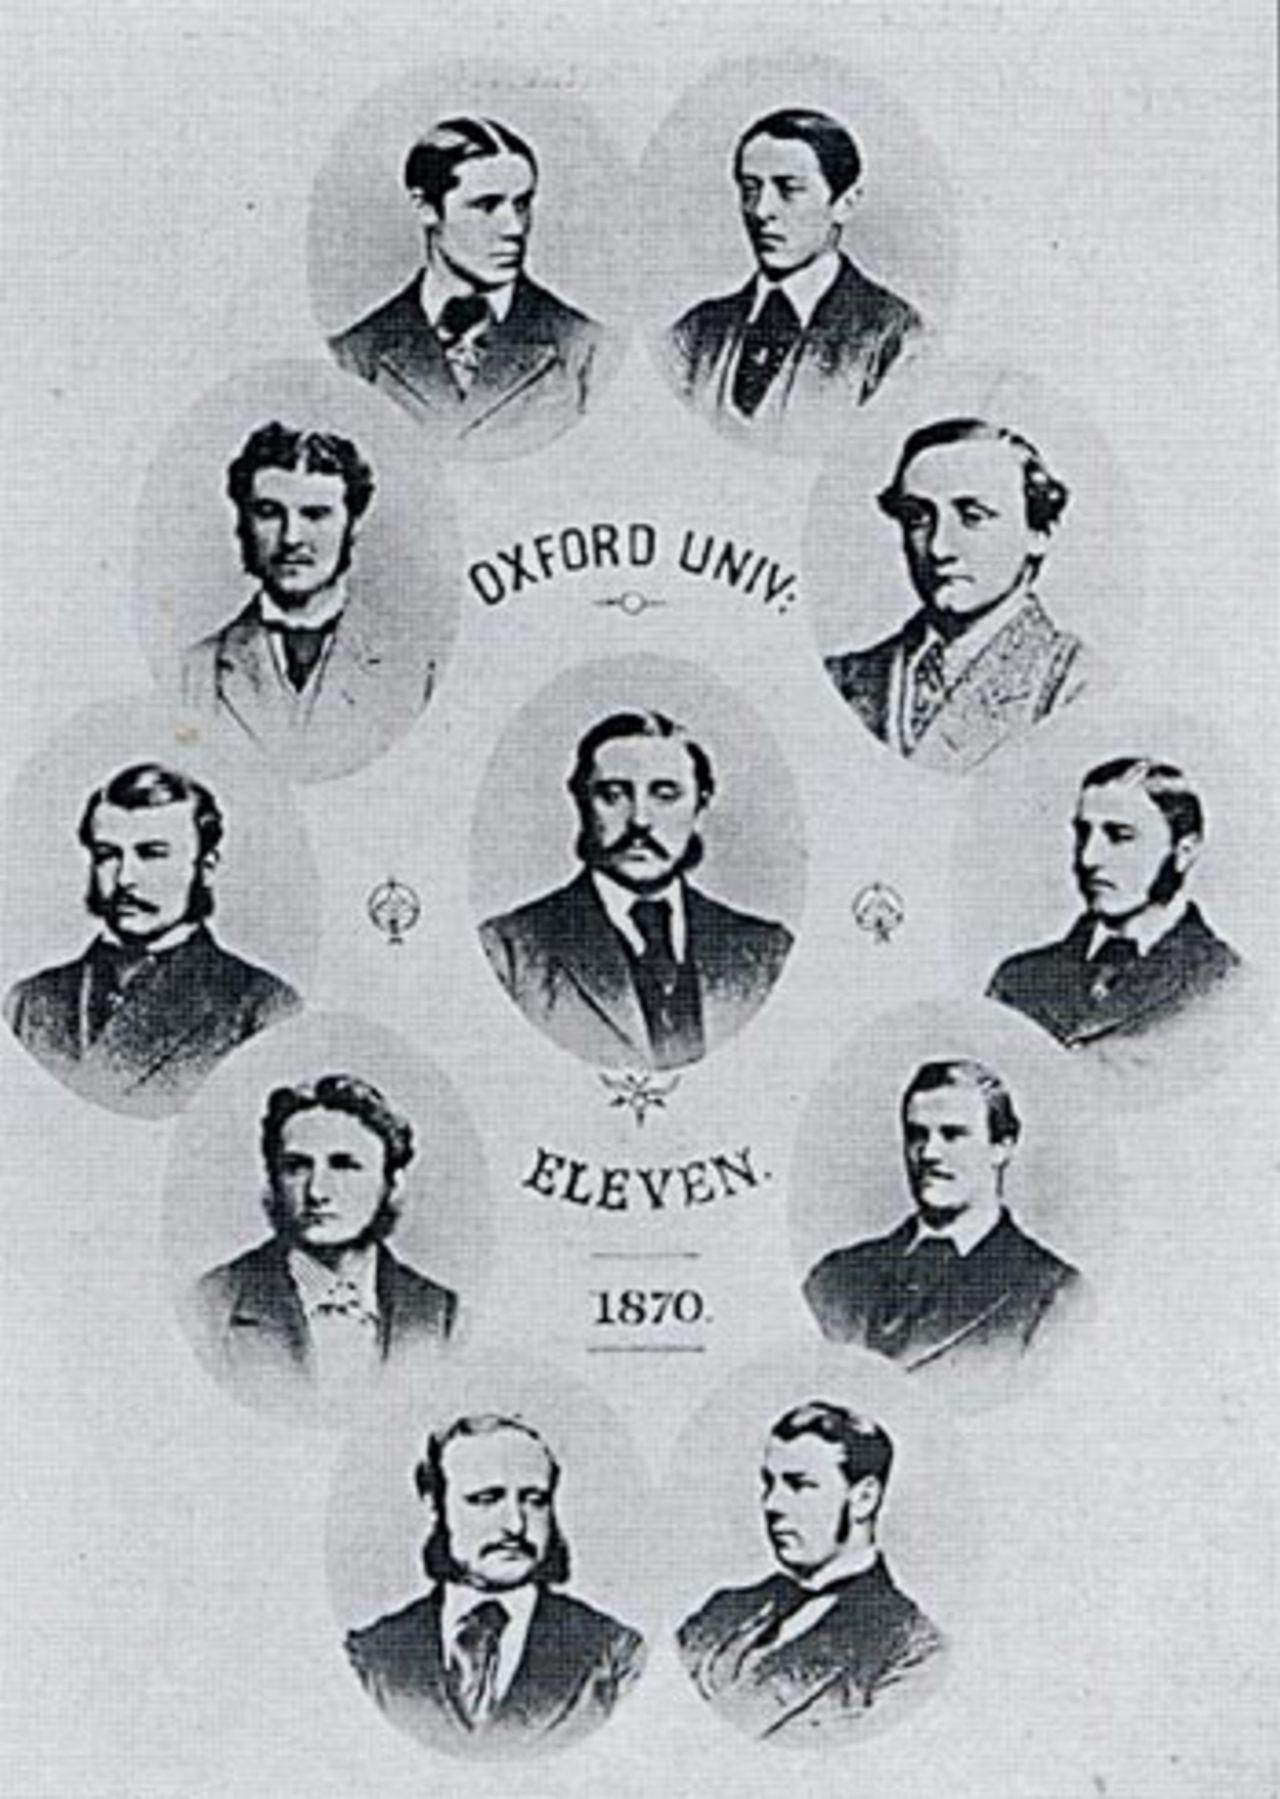 Oxford University XI in 1870. From left to right, top row: C.K. Francis, C.J. Ottaway, E.F.S. Tylecote, A.T. Fortescue. Middle row: W. Townshend, B. Pauncefote (captain), W.H. Hadow. Bottom row: F.H. Hill, T.H. Belcher, S.E. Butler, W.A. Stewart.